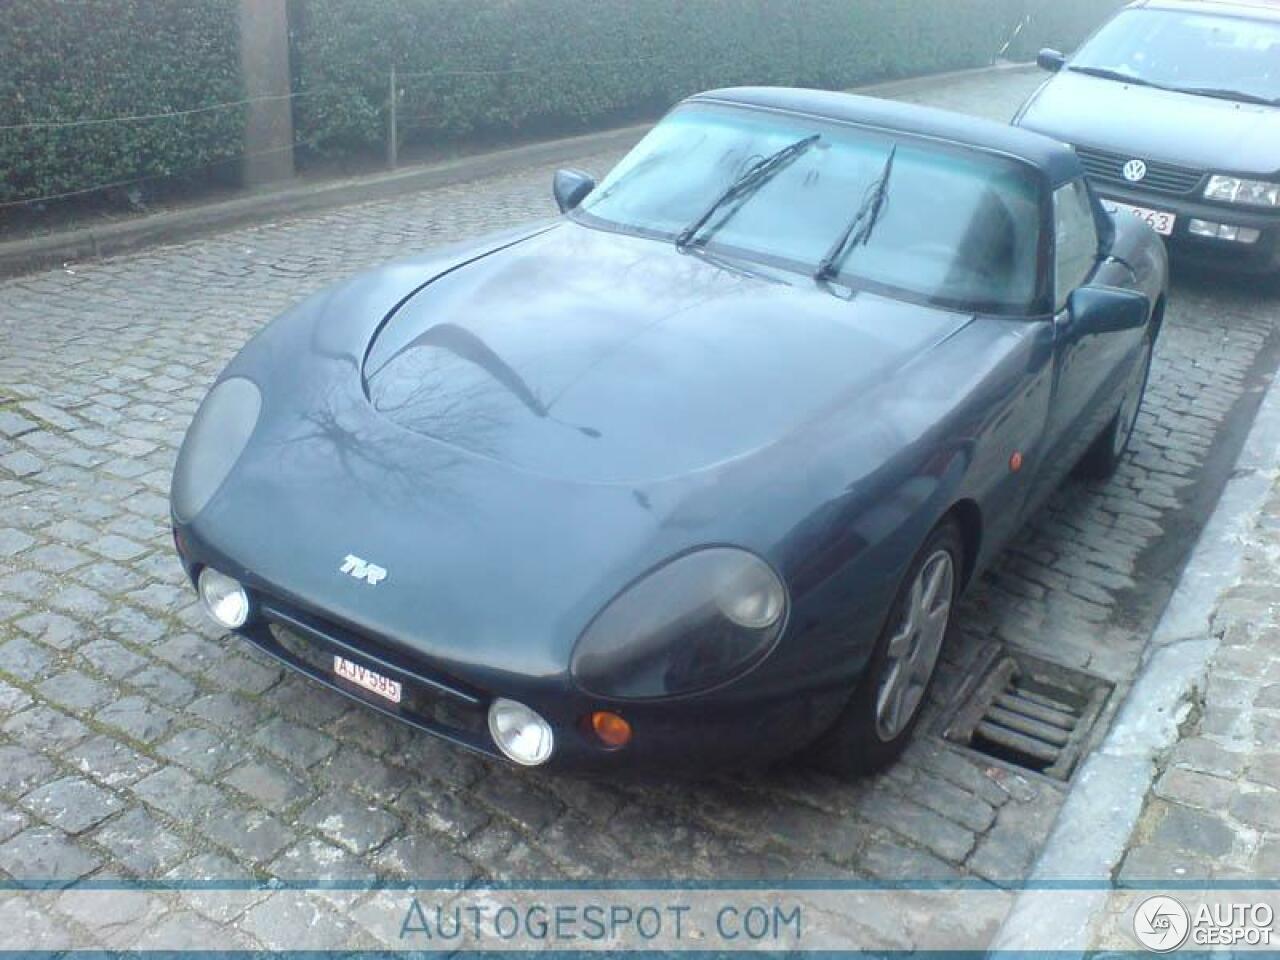 TVR Griffith